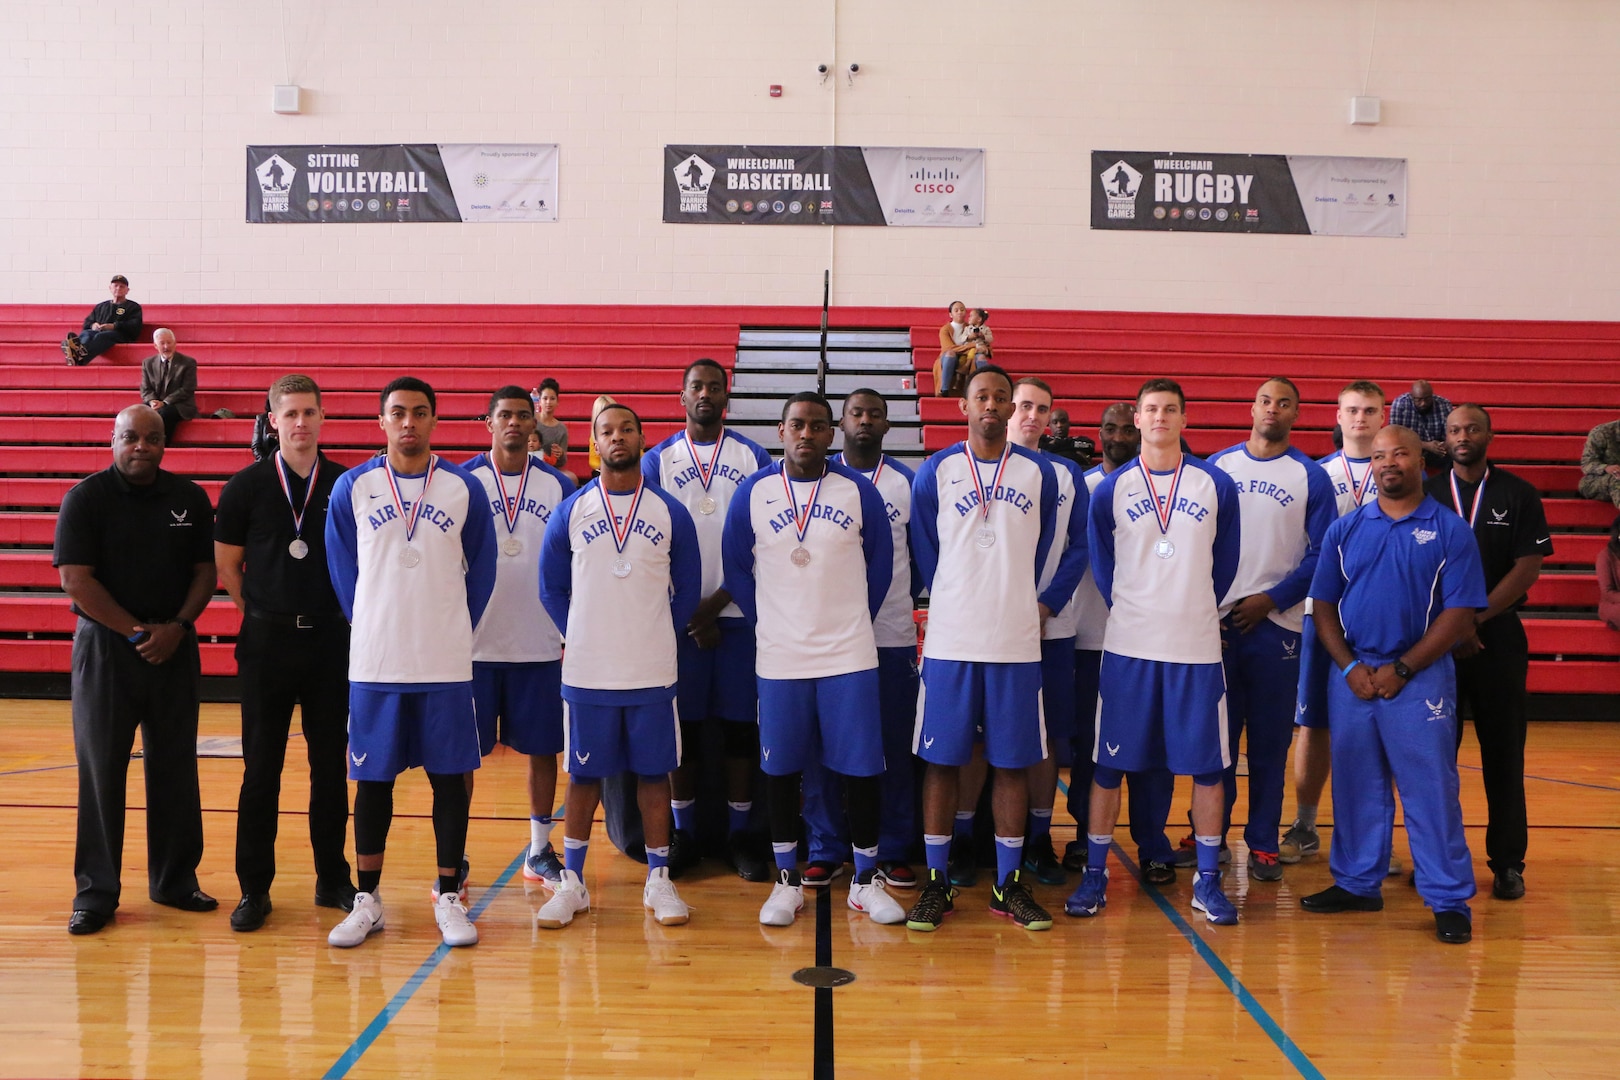 U.S. All-Air Force Men's Basketball Team.  The 2016 Armed Forces Men's Basketball Championship held at MCB Quantico, Va. from 1-7 November.  Air Force takes silver after Army won 67-61 in the championship game on Novemer 7th.